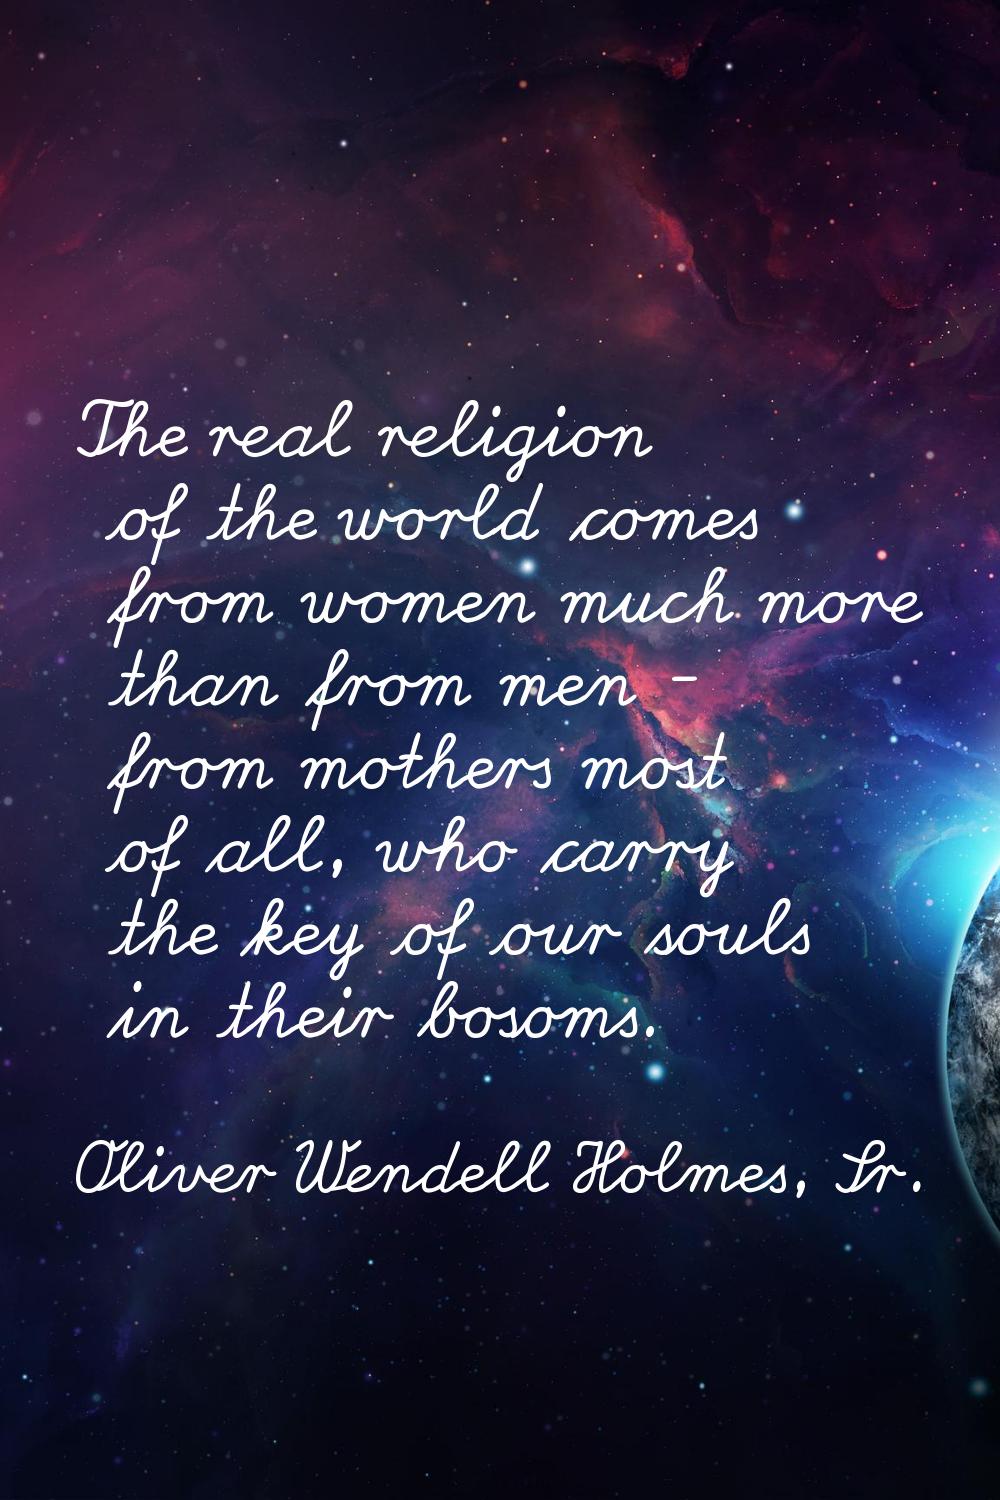 The real religion of the world comes from women much more than from men - from mothers most of all,